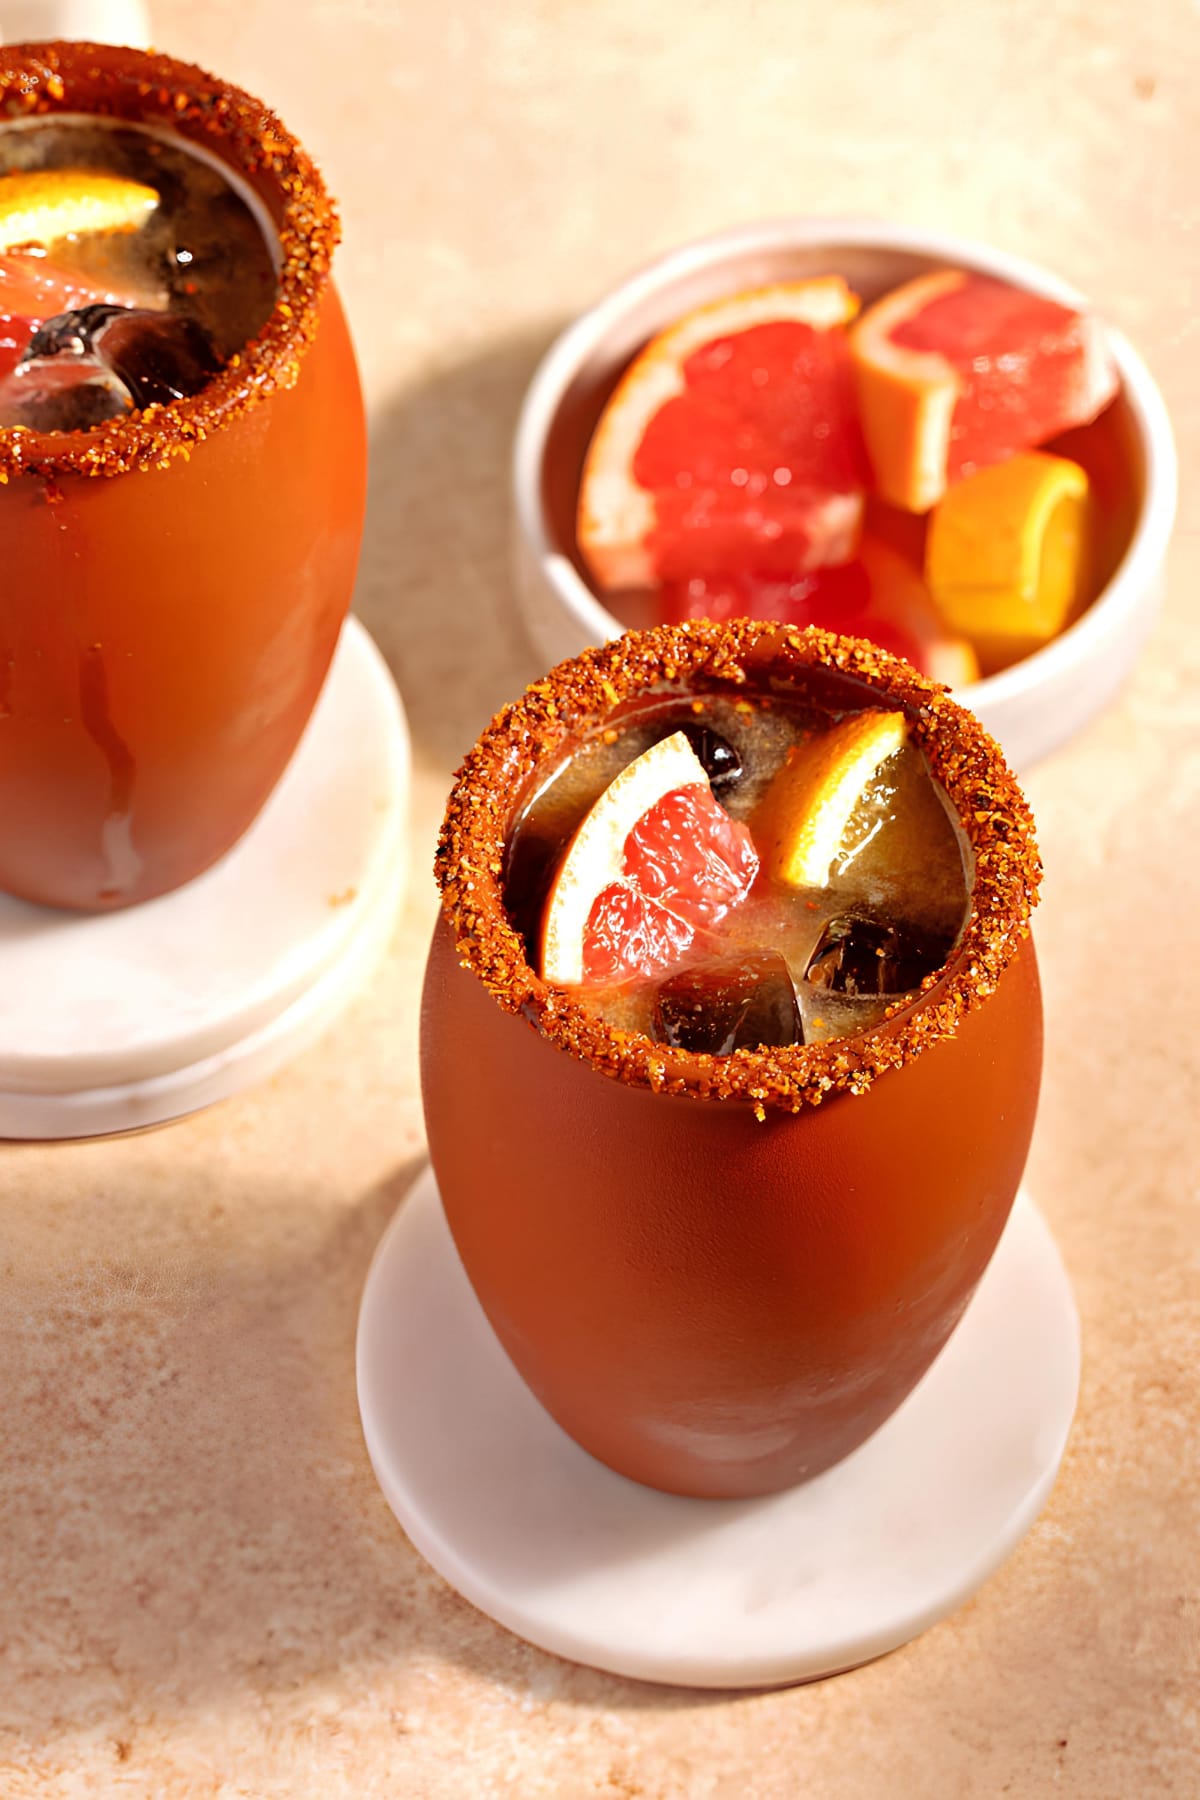 Cocktails served Cantarito mugs with tajin on rims garnished with slices of fresh graprfruit.